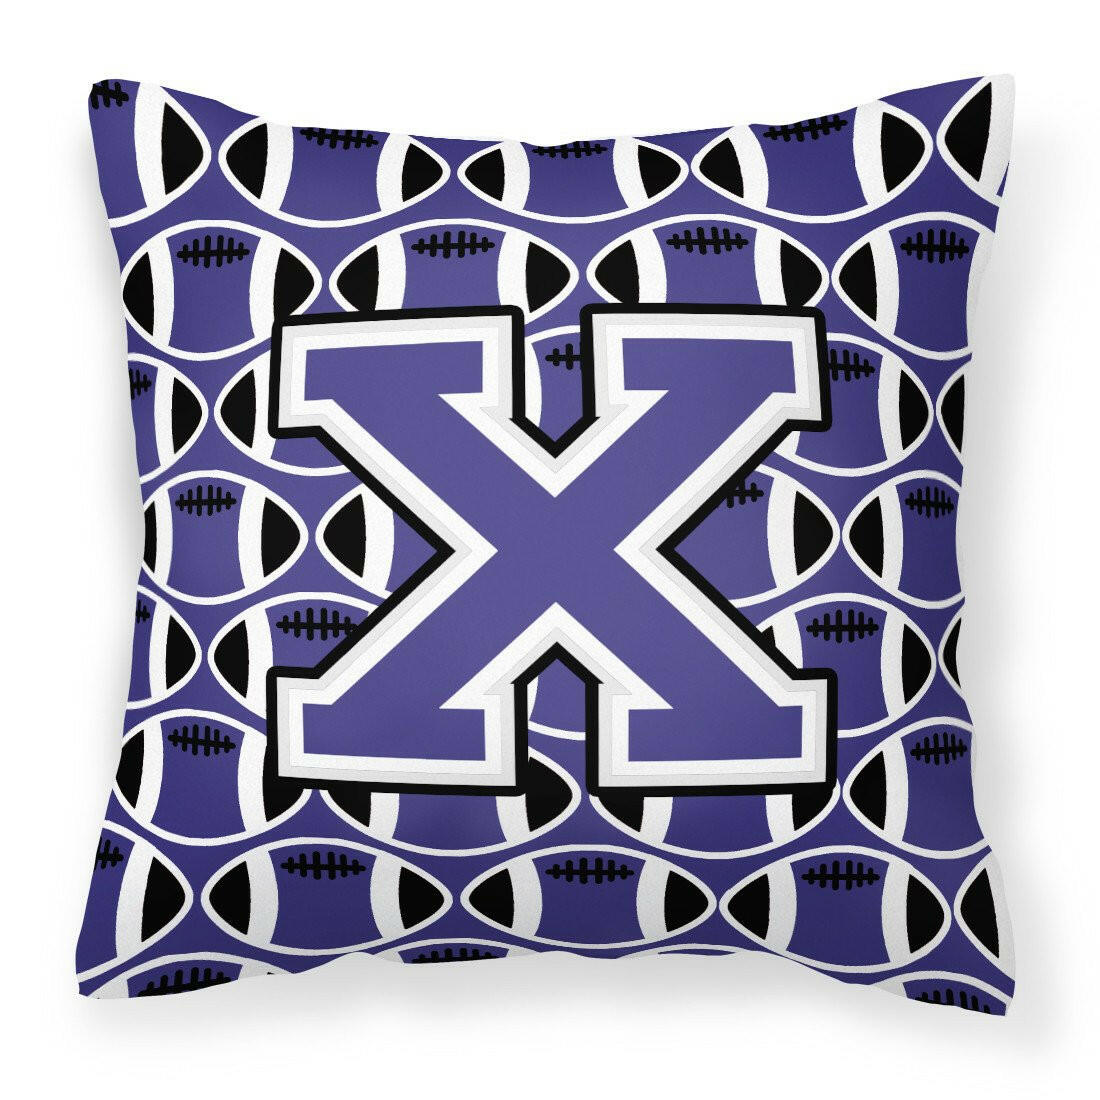 Letter X Football Purple and White Fabric Decorative Pillow CJ1068-XPW1414 by Caroline's Treasures